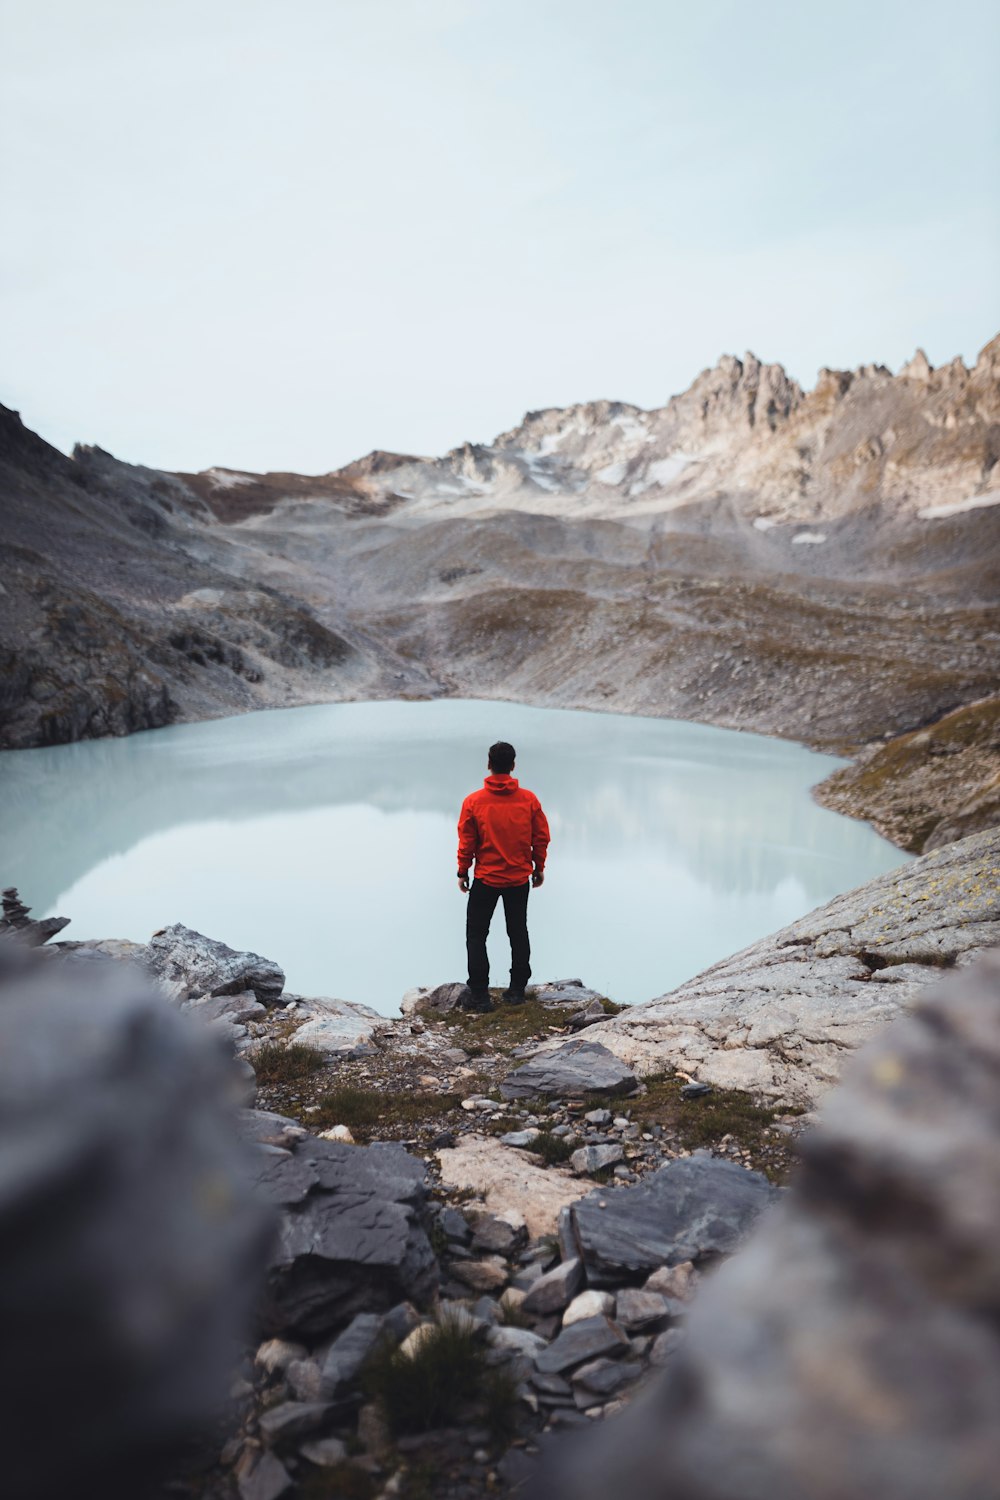 man in red jacket standing on rocky ground near lake during daytime